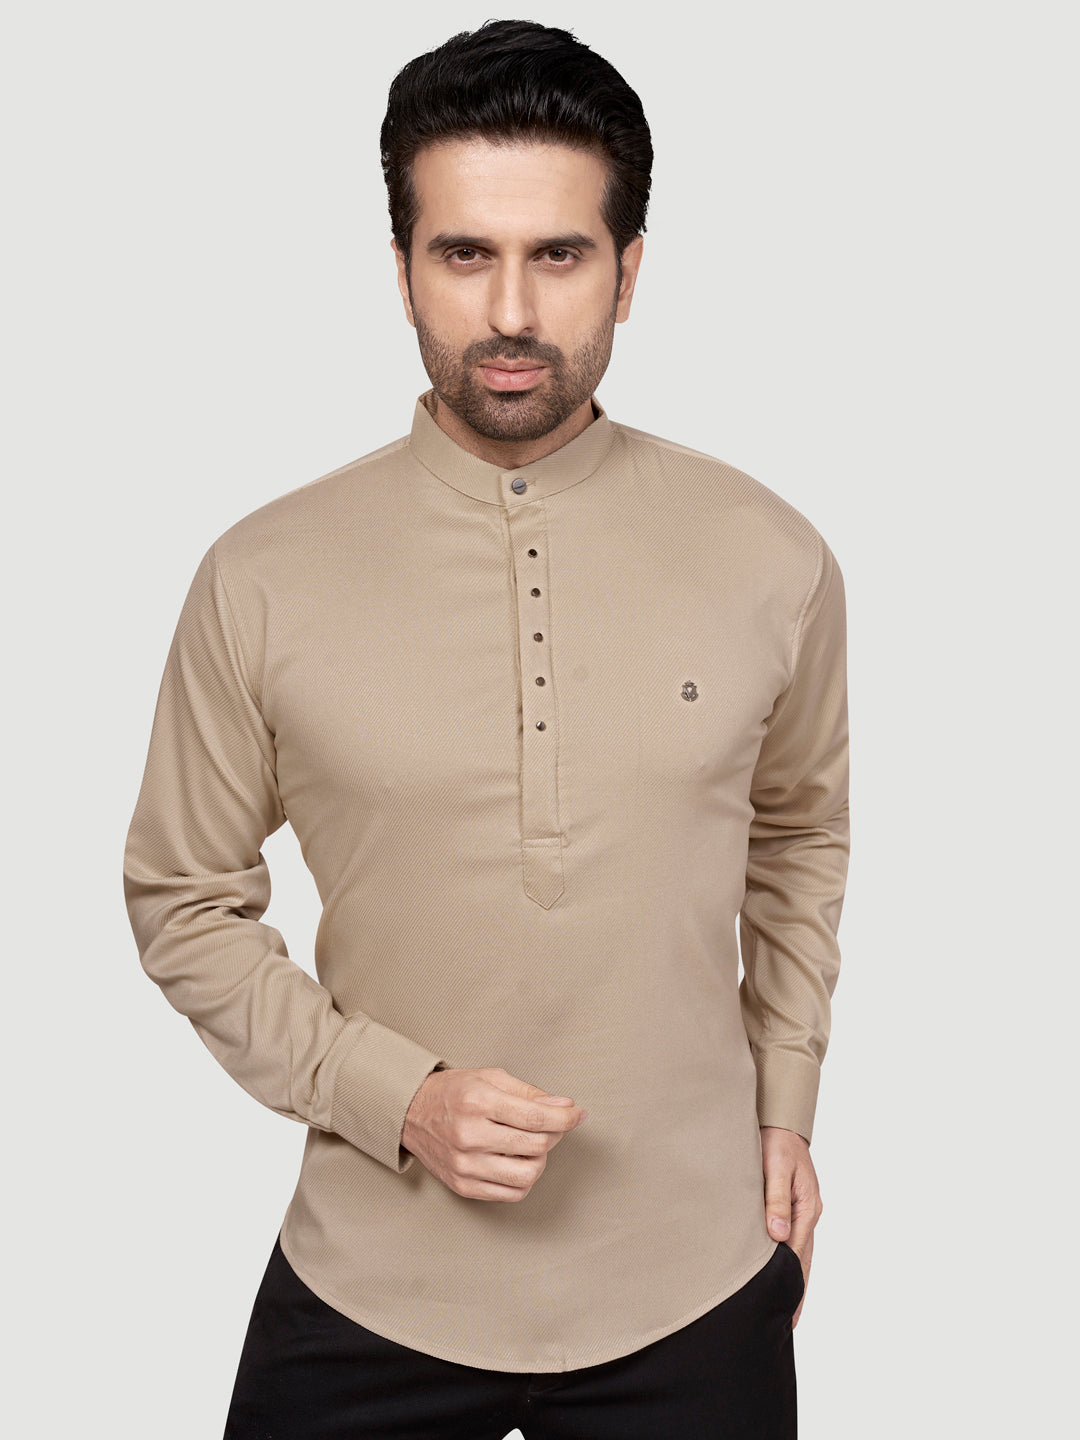 Black and White Men's Designer Short Kurta with Metal Buttons Ivory